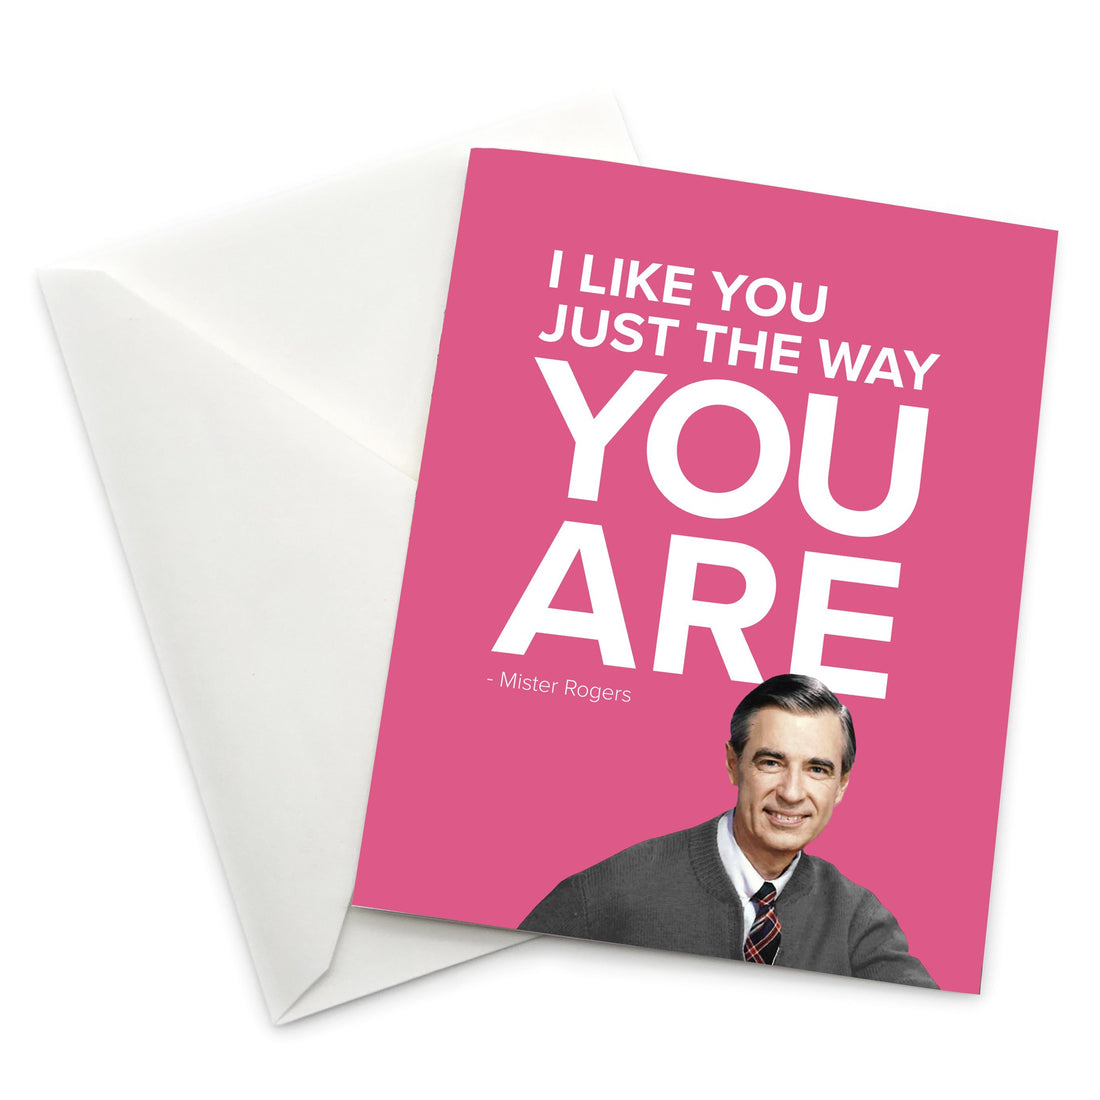 Mister Rogers Greeting Card - I Like You Just the Way You Are